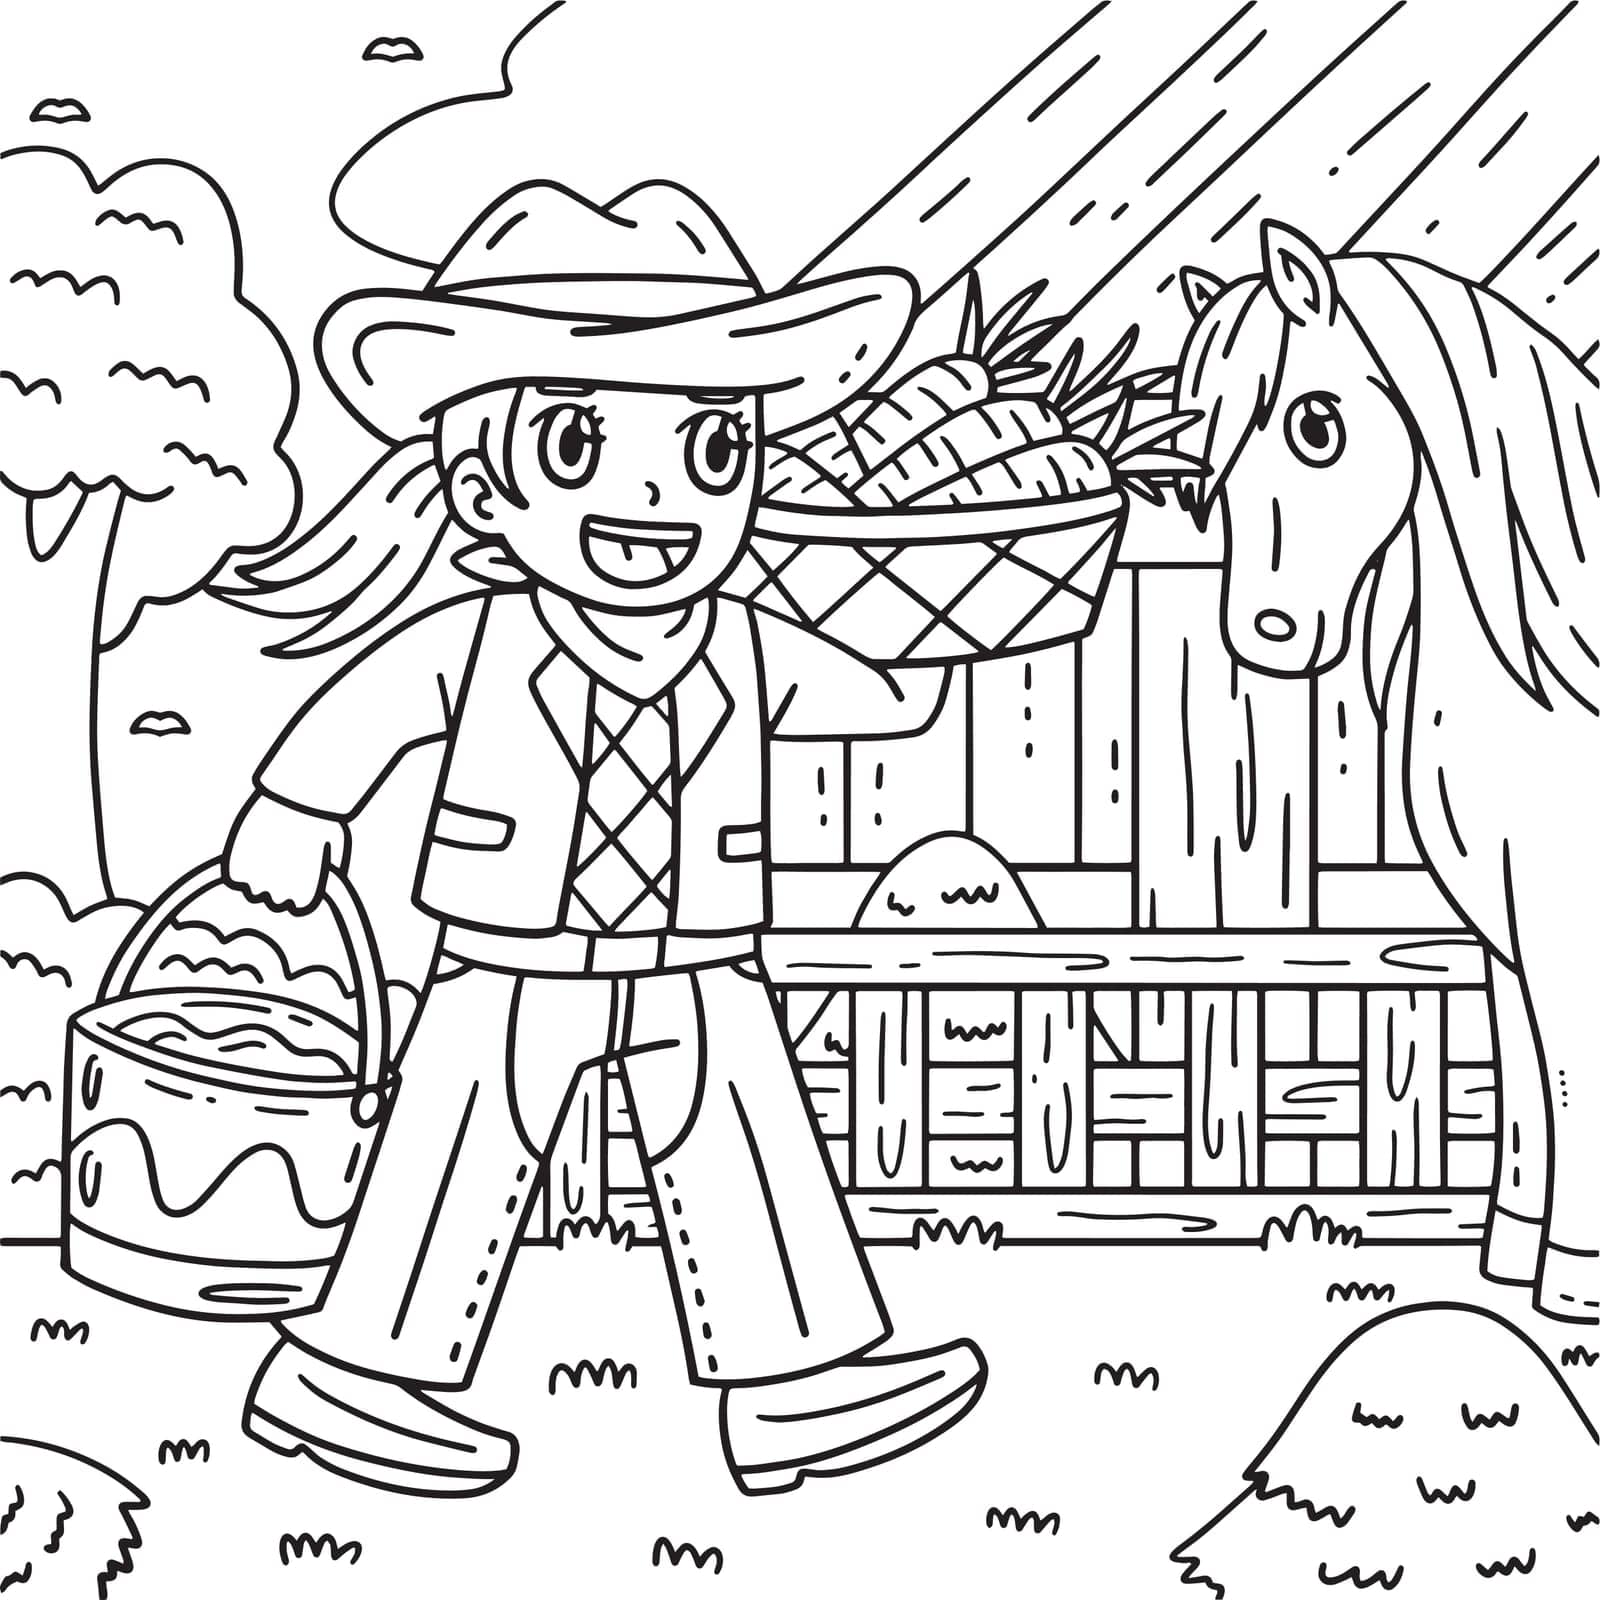 A cute and funny coloring page of a Cowgirl with Carrots and Bucket of Water. Provides hours of coloring fun for children. To color, this page is very easy. Suitable for little kids and toddlers.